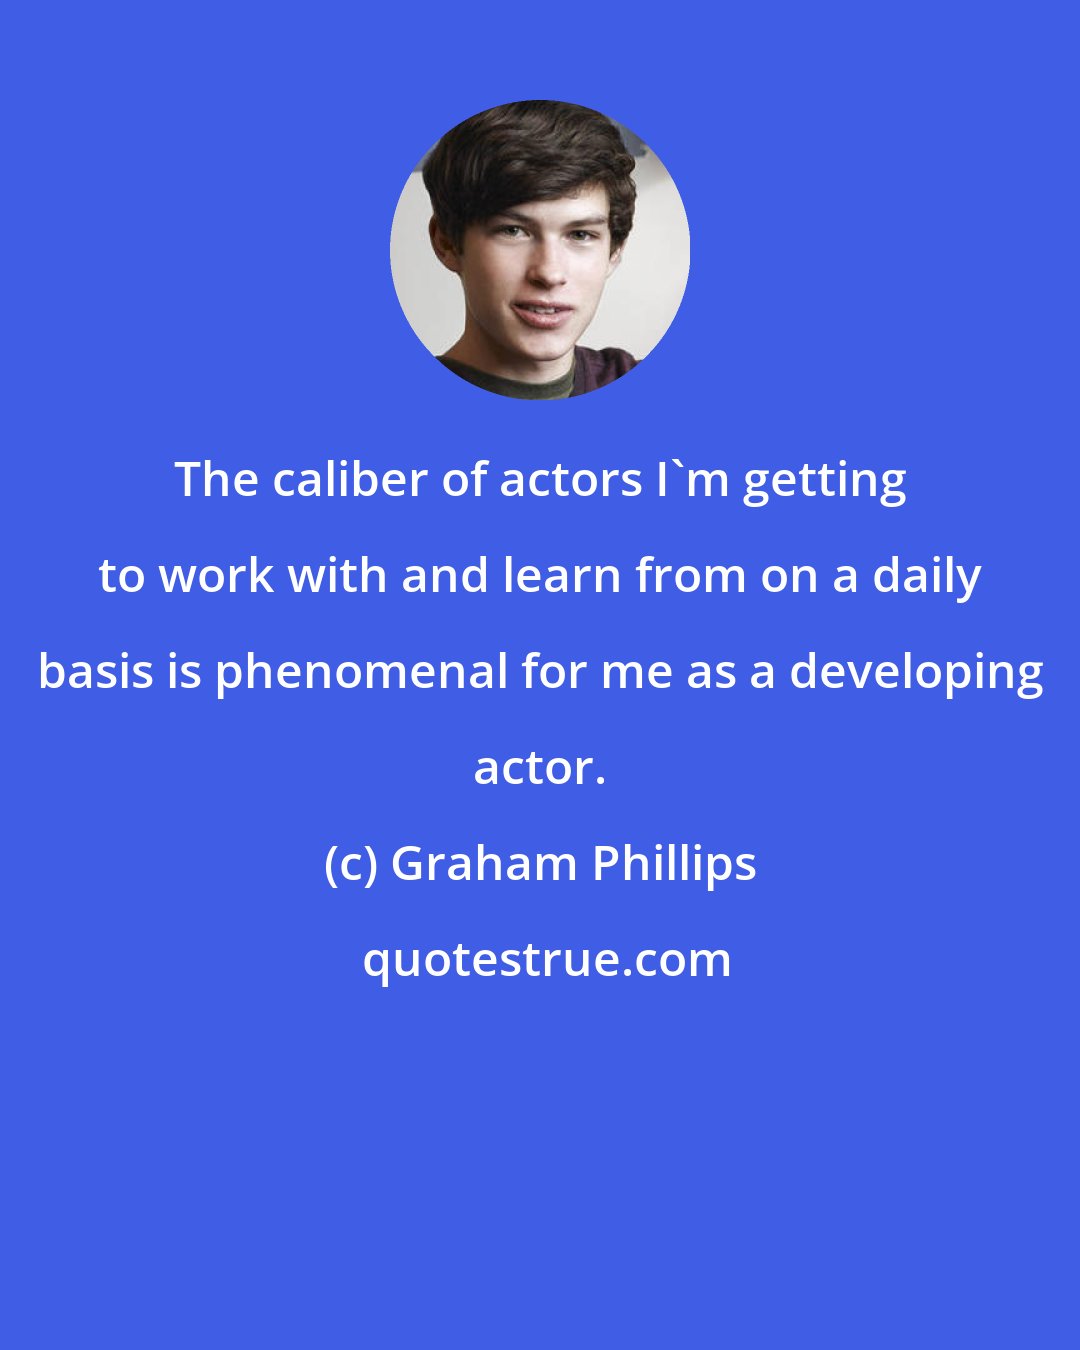 Graham Phillips: The caliber of actors I'm getting to work with and learn from on a daily basis is phenomenal for me as a developing actor.